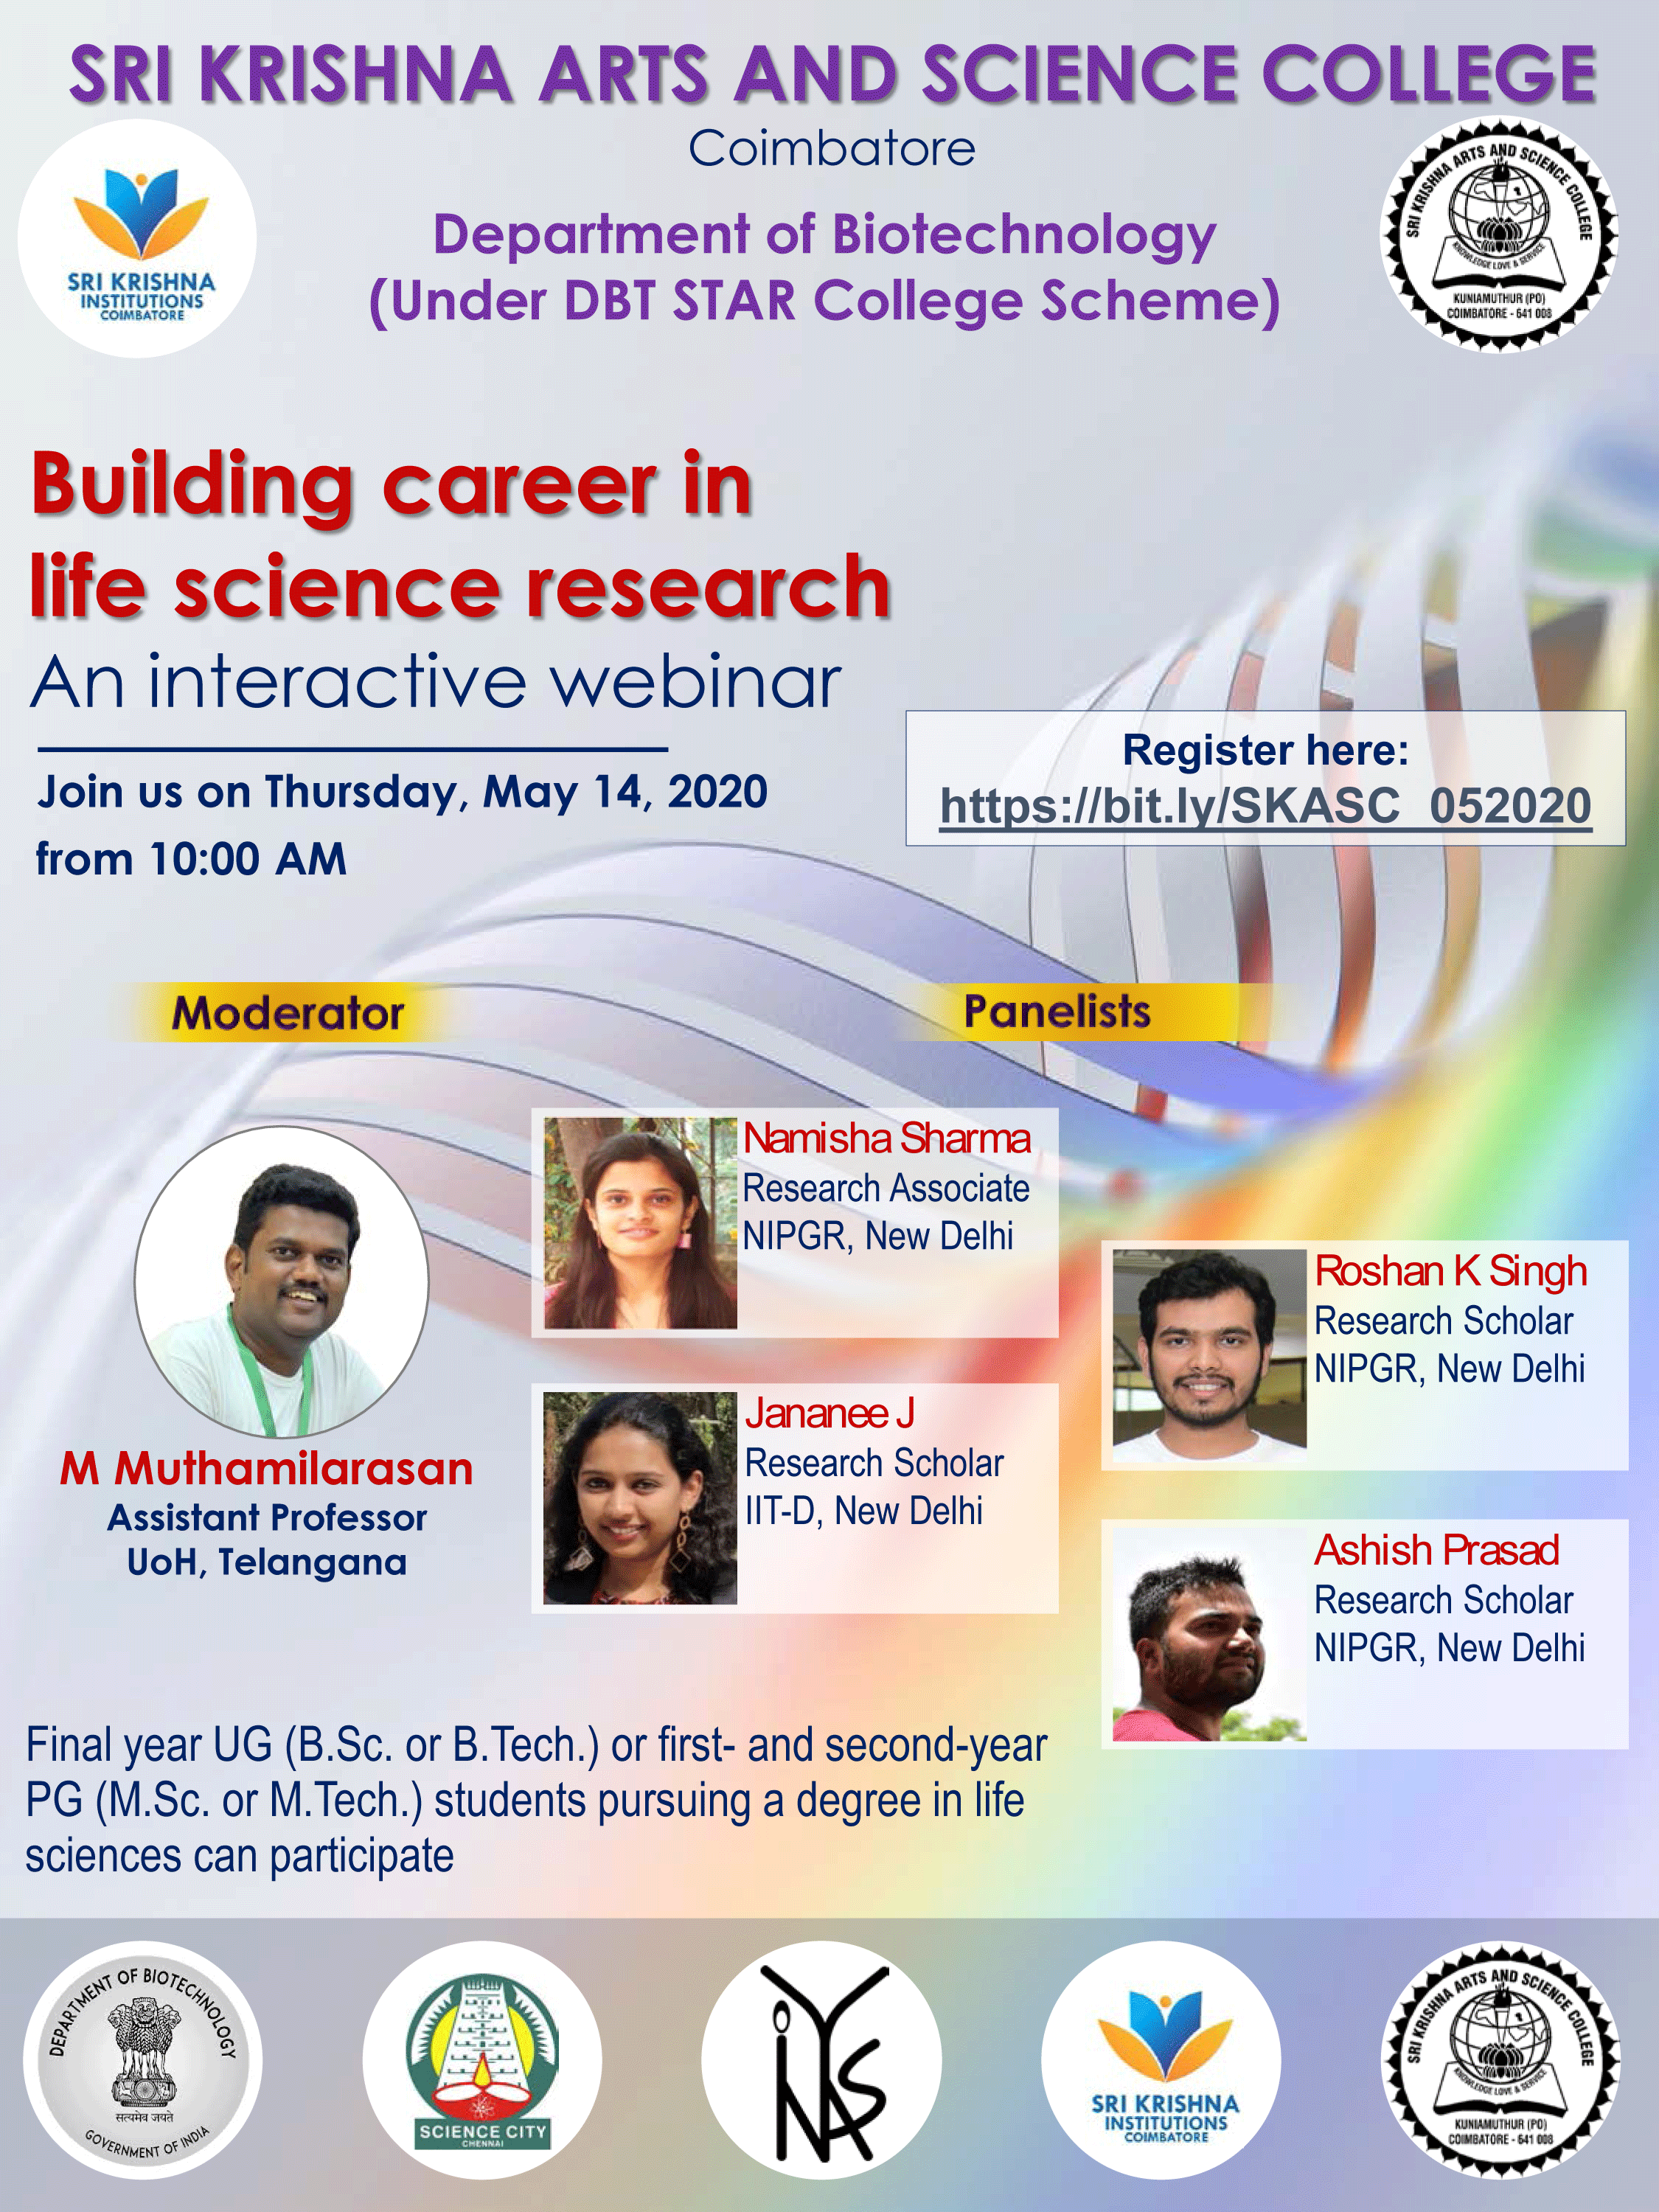 Building Career in Life Science Research - An Interactive Webinar